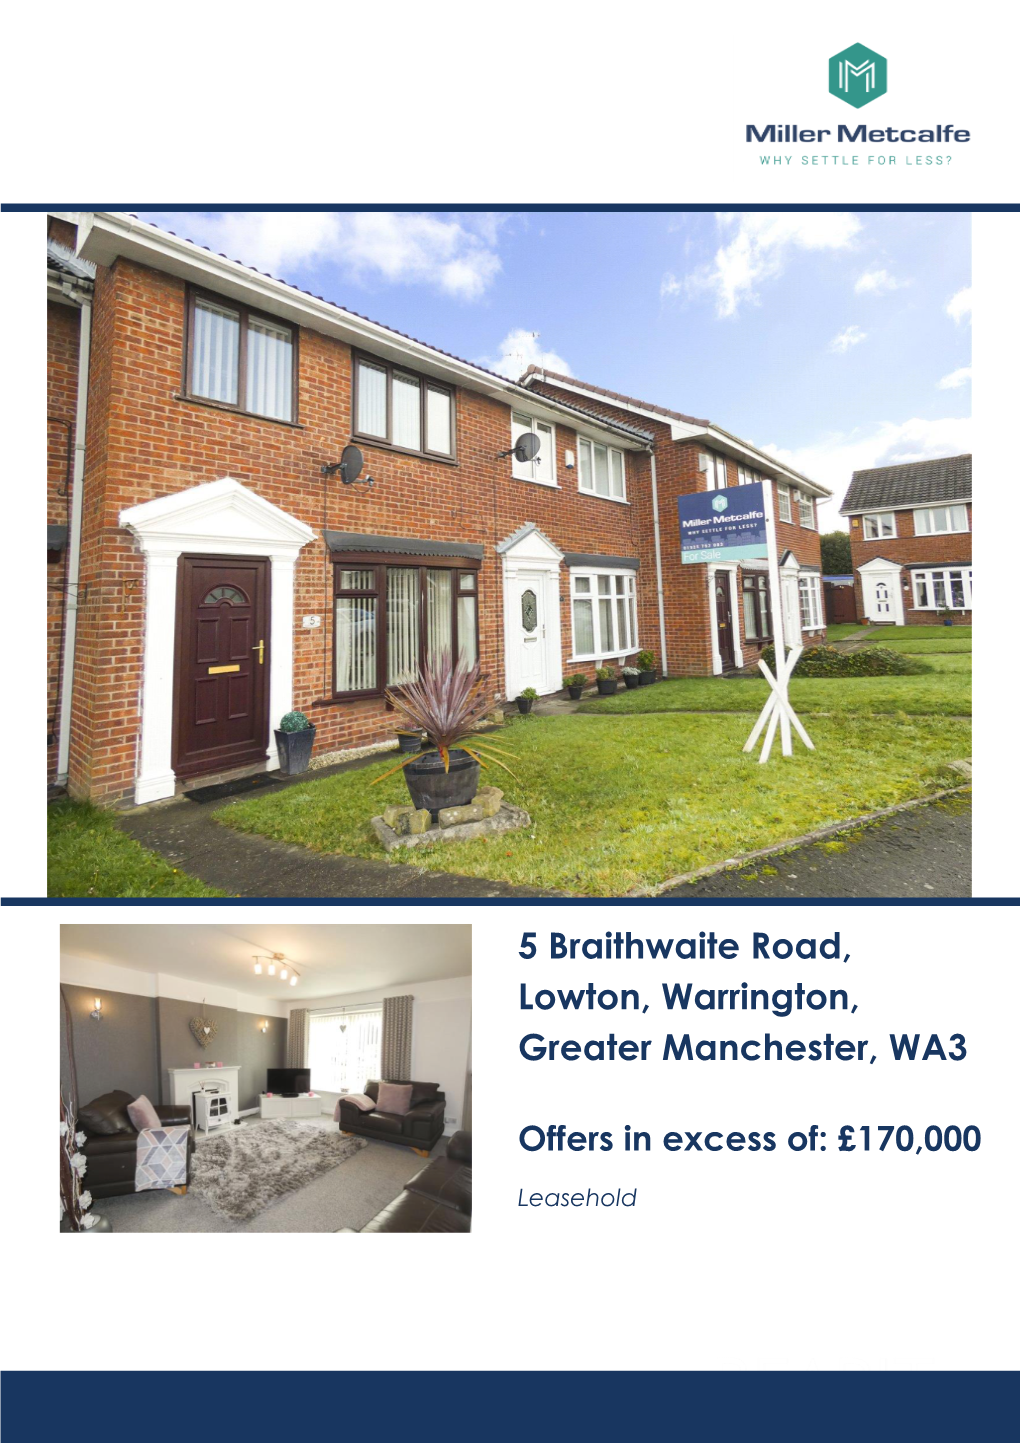 5 Braithwaite Road, Lowton, Warrington, Greater Manchester, WA3 2HY Offers in Excess Of: £170,000